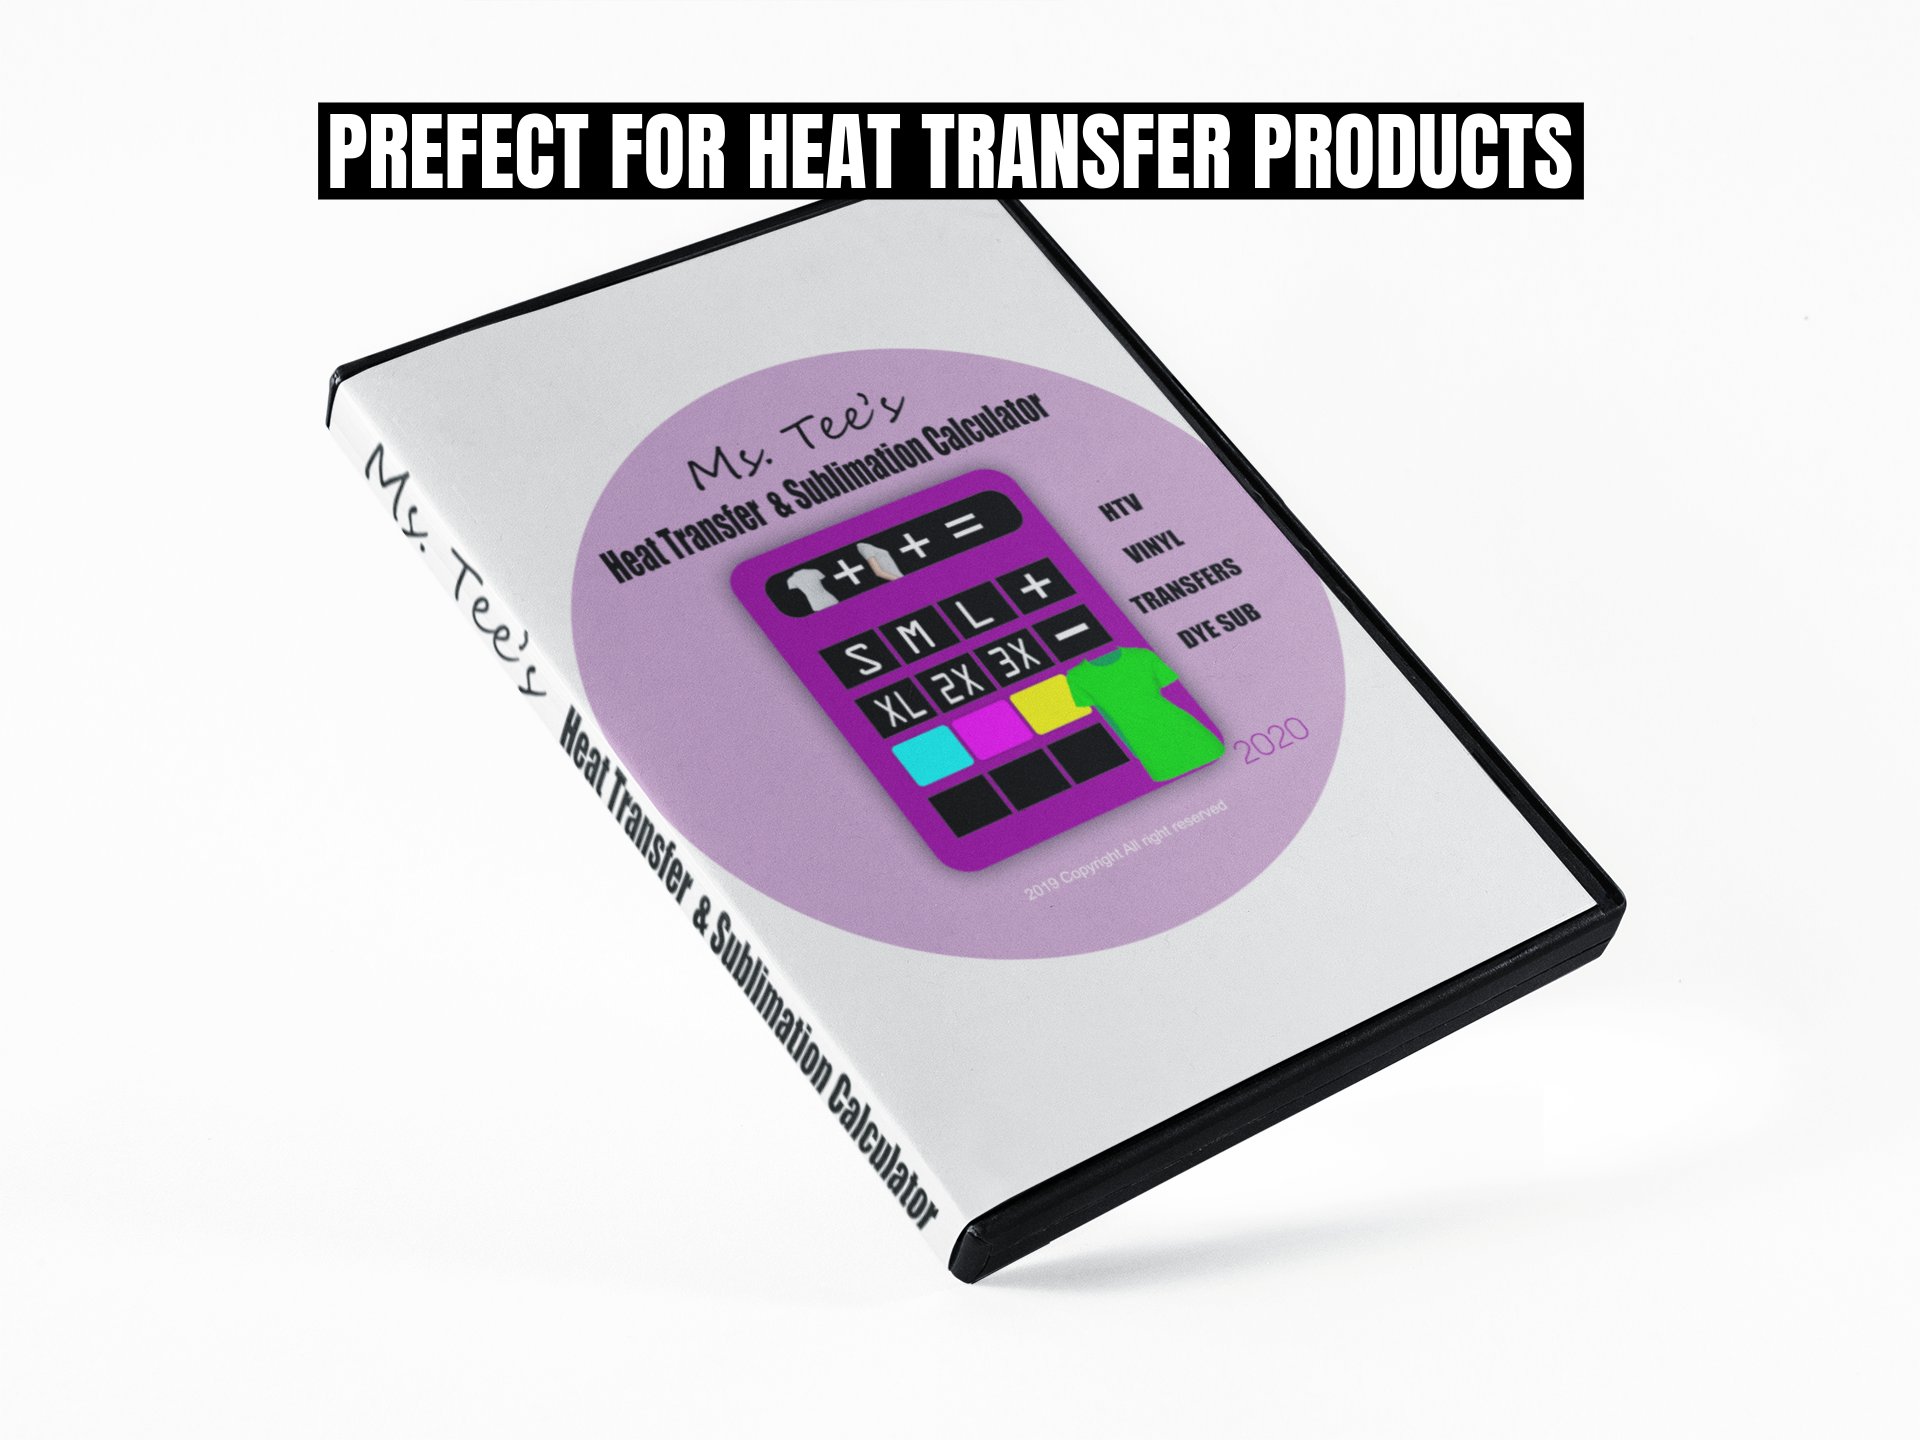 Pricing Heat Transfer Products – Interactive Webinar Training ($0-Free Training)